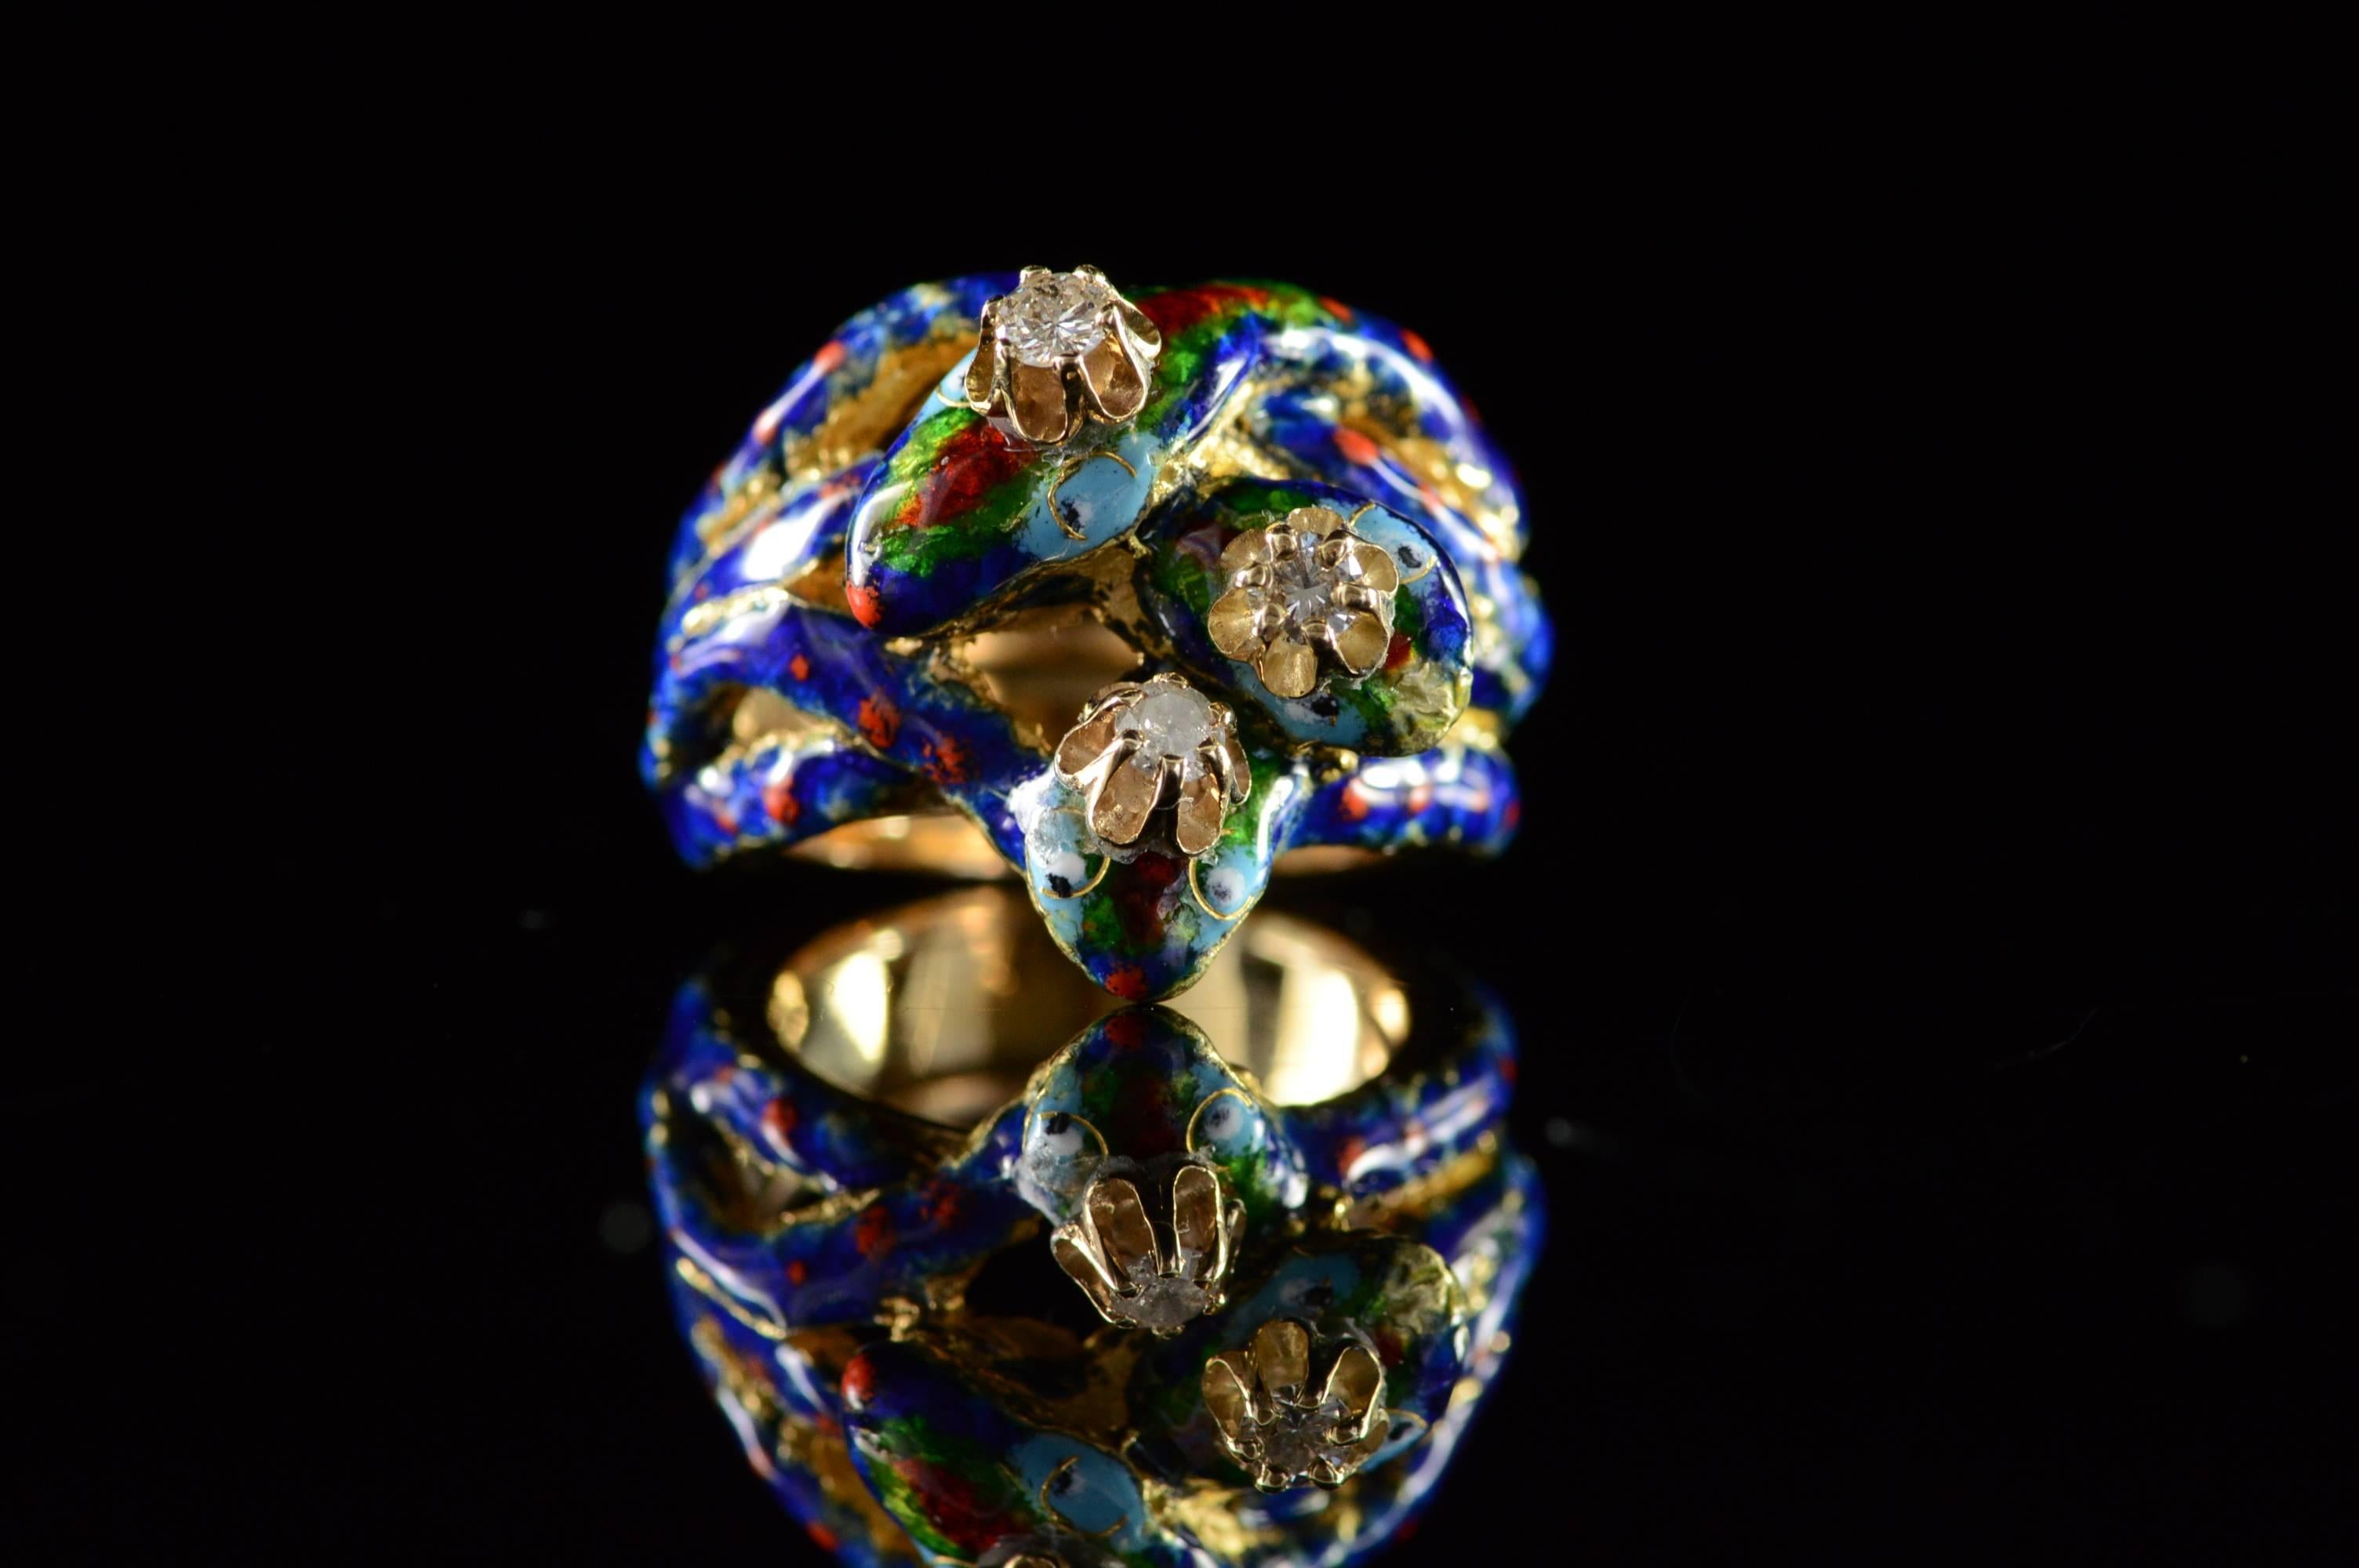 Unfortunately we do not know the maker of this exquisite ring, but its abstract brutal nature speaks volumes for the piece in their absence. This item is believed to have been crafted in the late 1940s to mid 1950s as part of the Abstract